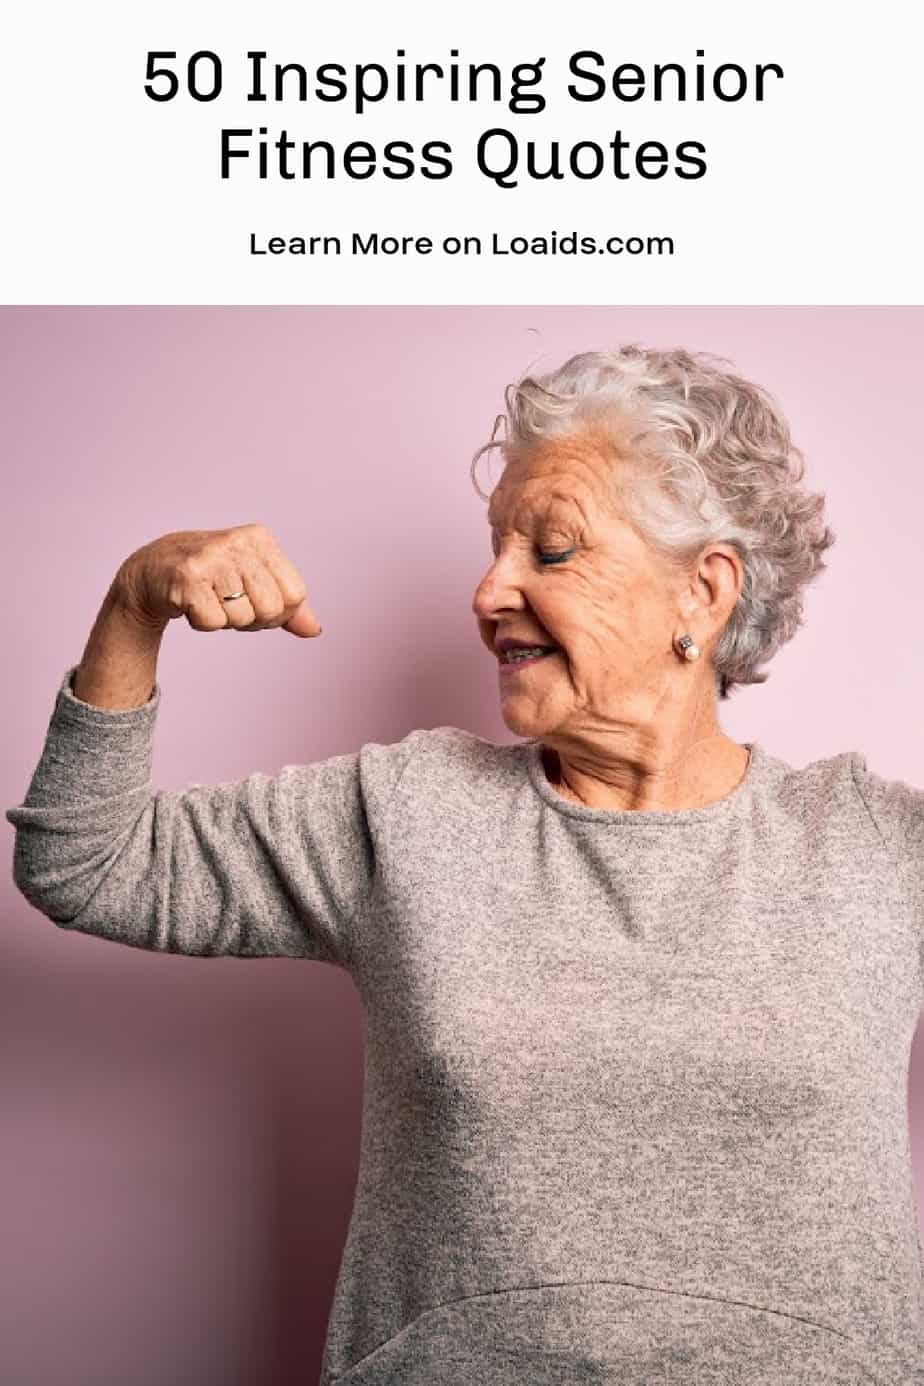 Need the motivation to get moving? Check out these 50 inspiring senior fitness quotes that will inspire you to keep up with your fitness routine! Keep reading!